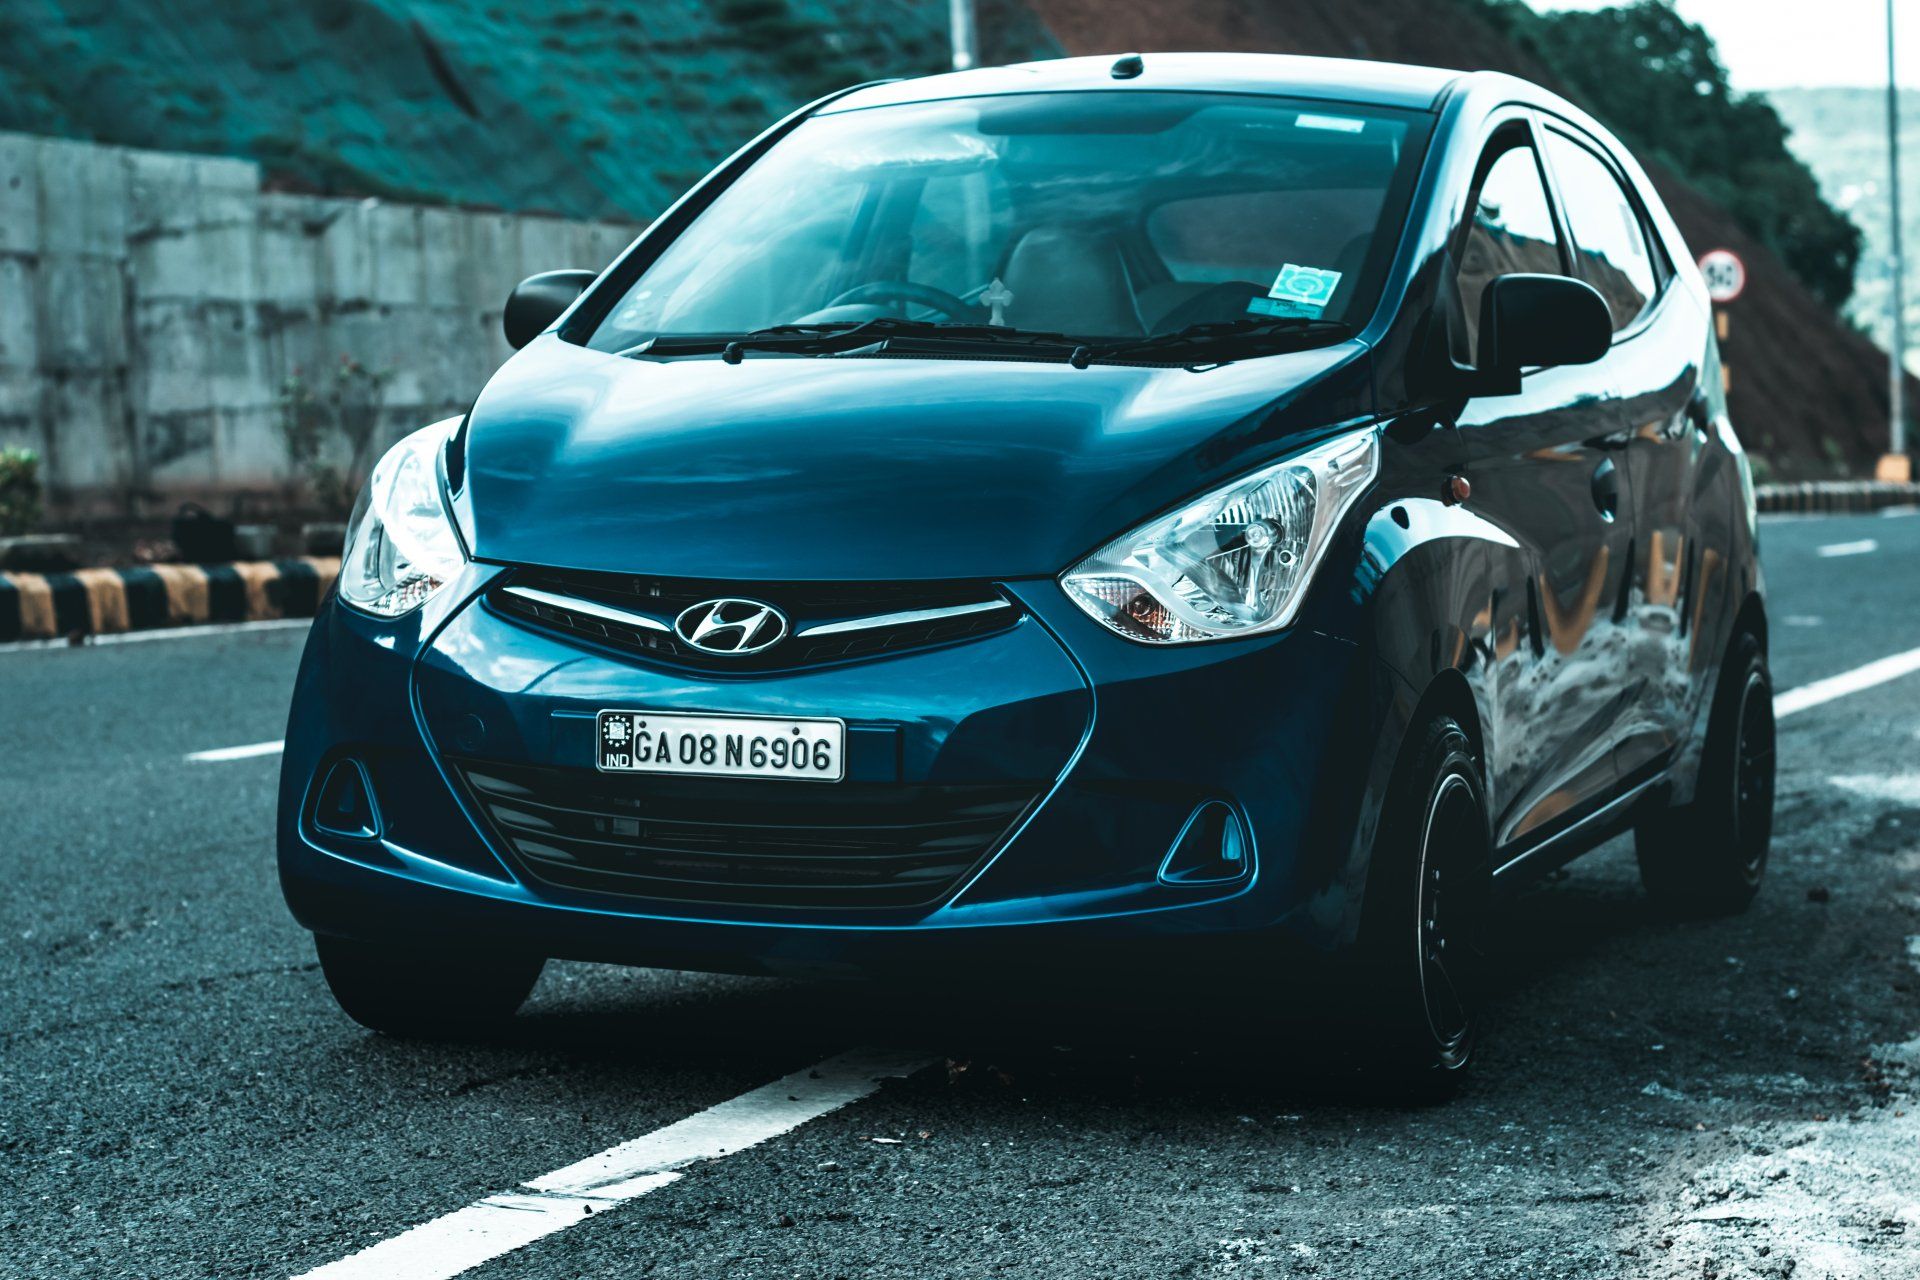 Hyundai Accent parked on side of road